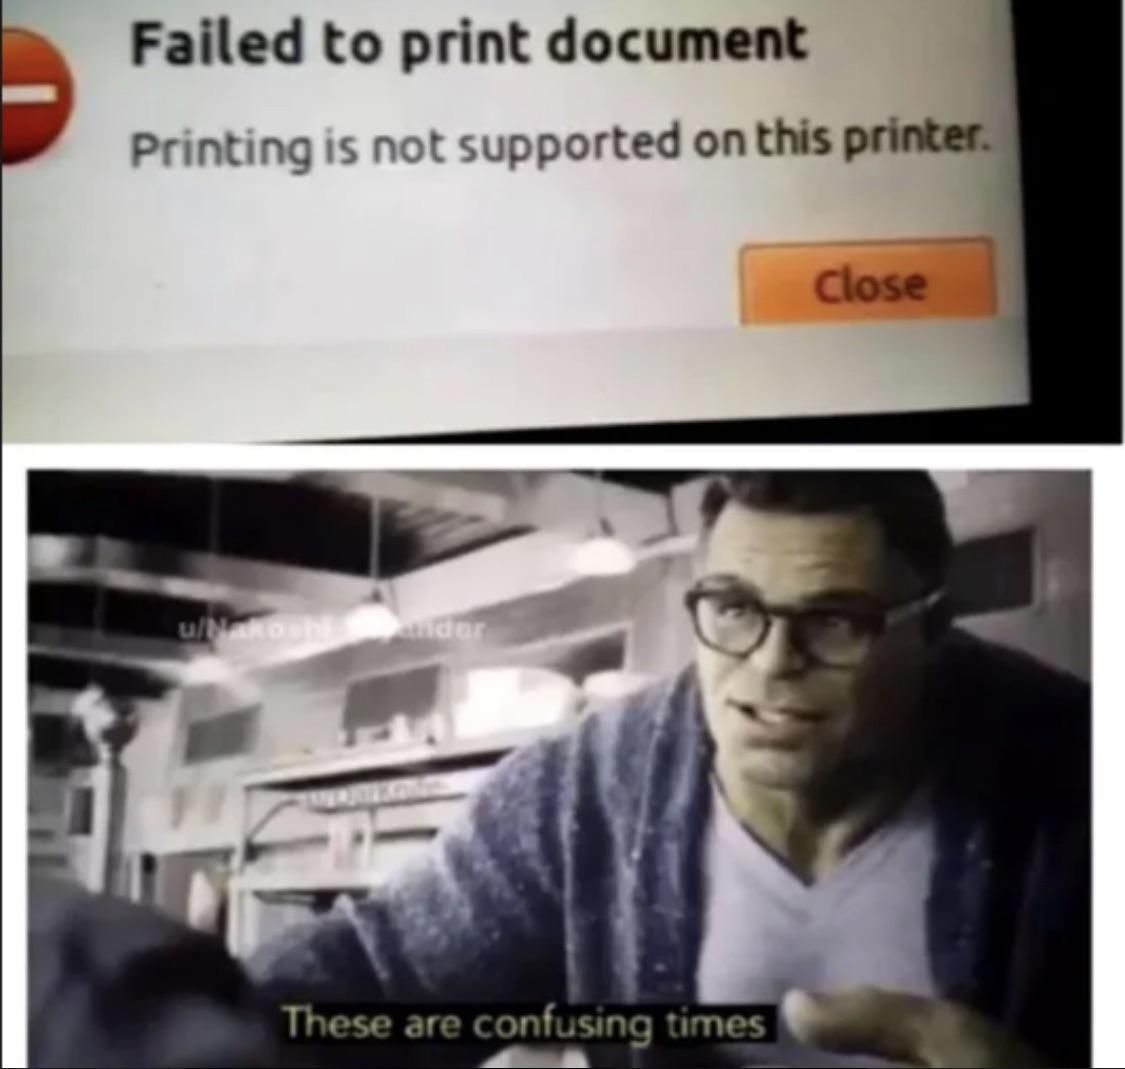 Printing is not supported on this printer